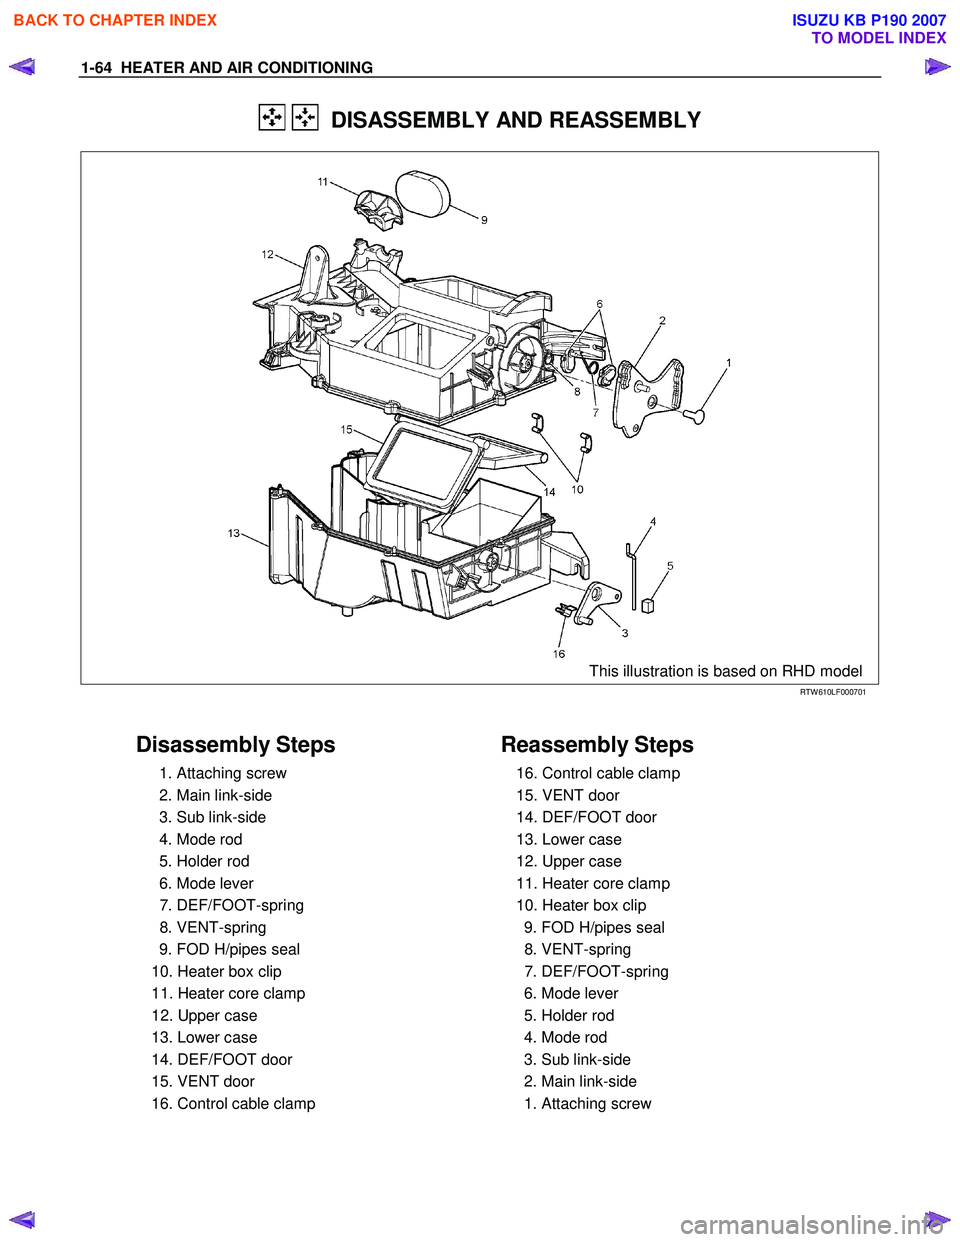 ISUZU KB P190 2007  Workshop Repair Manual 1-64  HEATER AND AIR CONDITIONING 
   DISASSEMBLY AND REASSEMBLY 
  
 
This illustration is based on RHD model   
RTW 610LF000701 
 
 
Disassembly Steps   
  1. Attaching screw  
  2. Main link-side 
